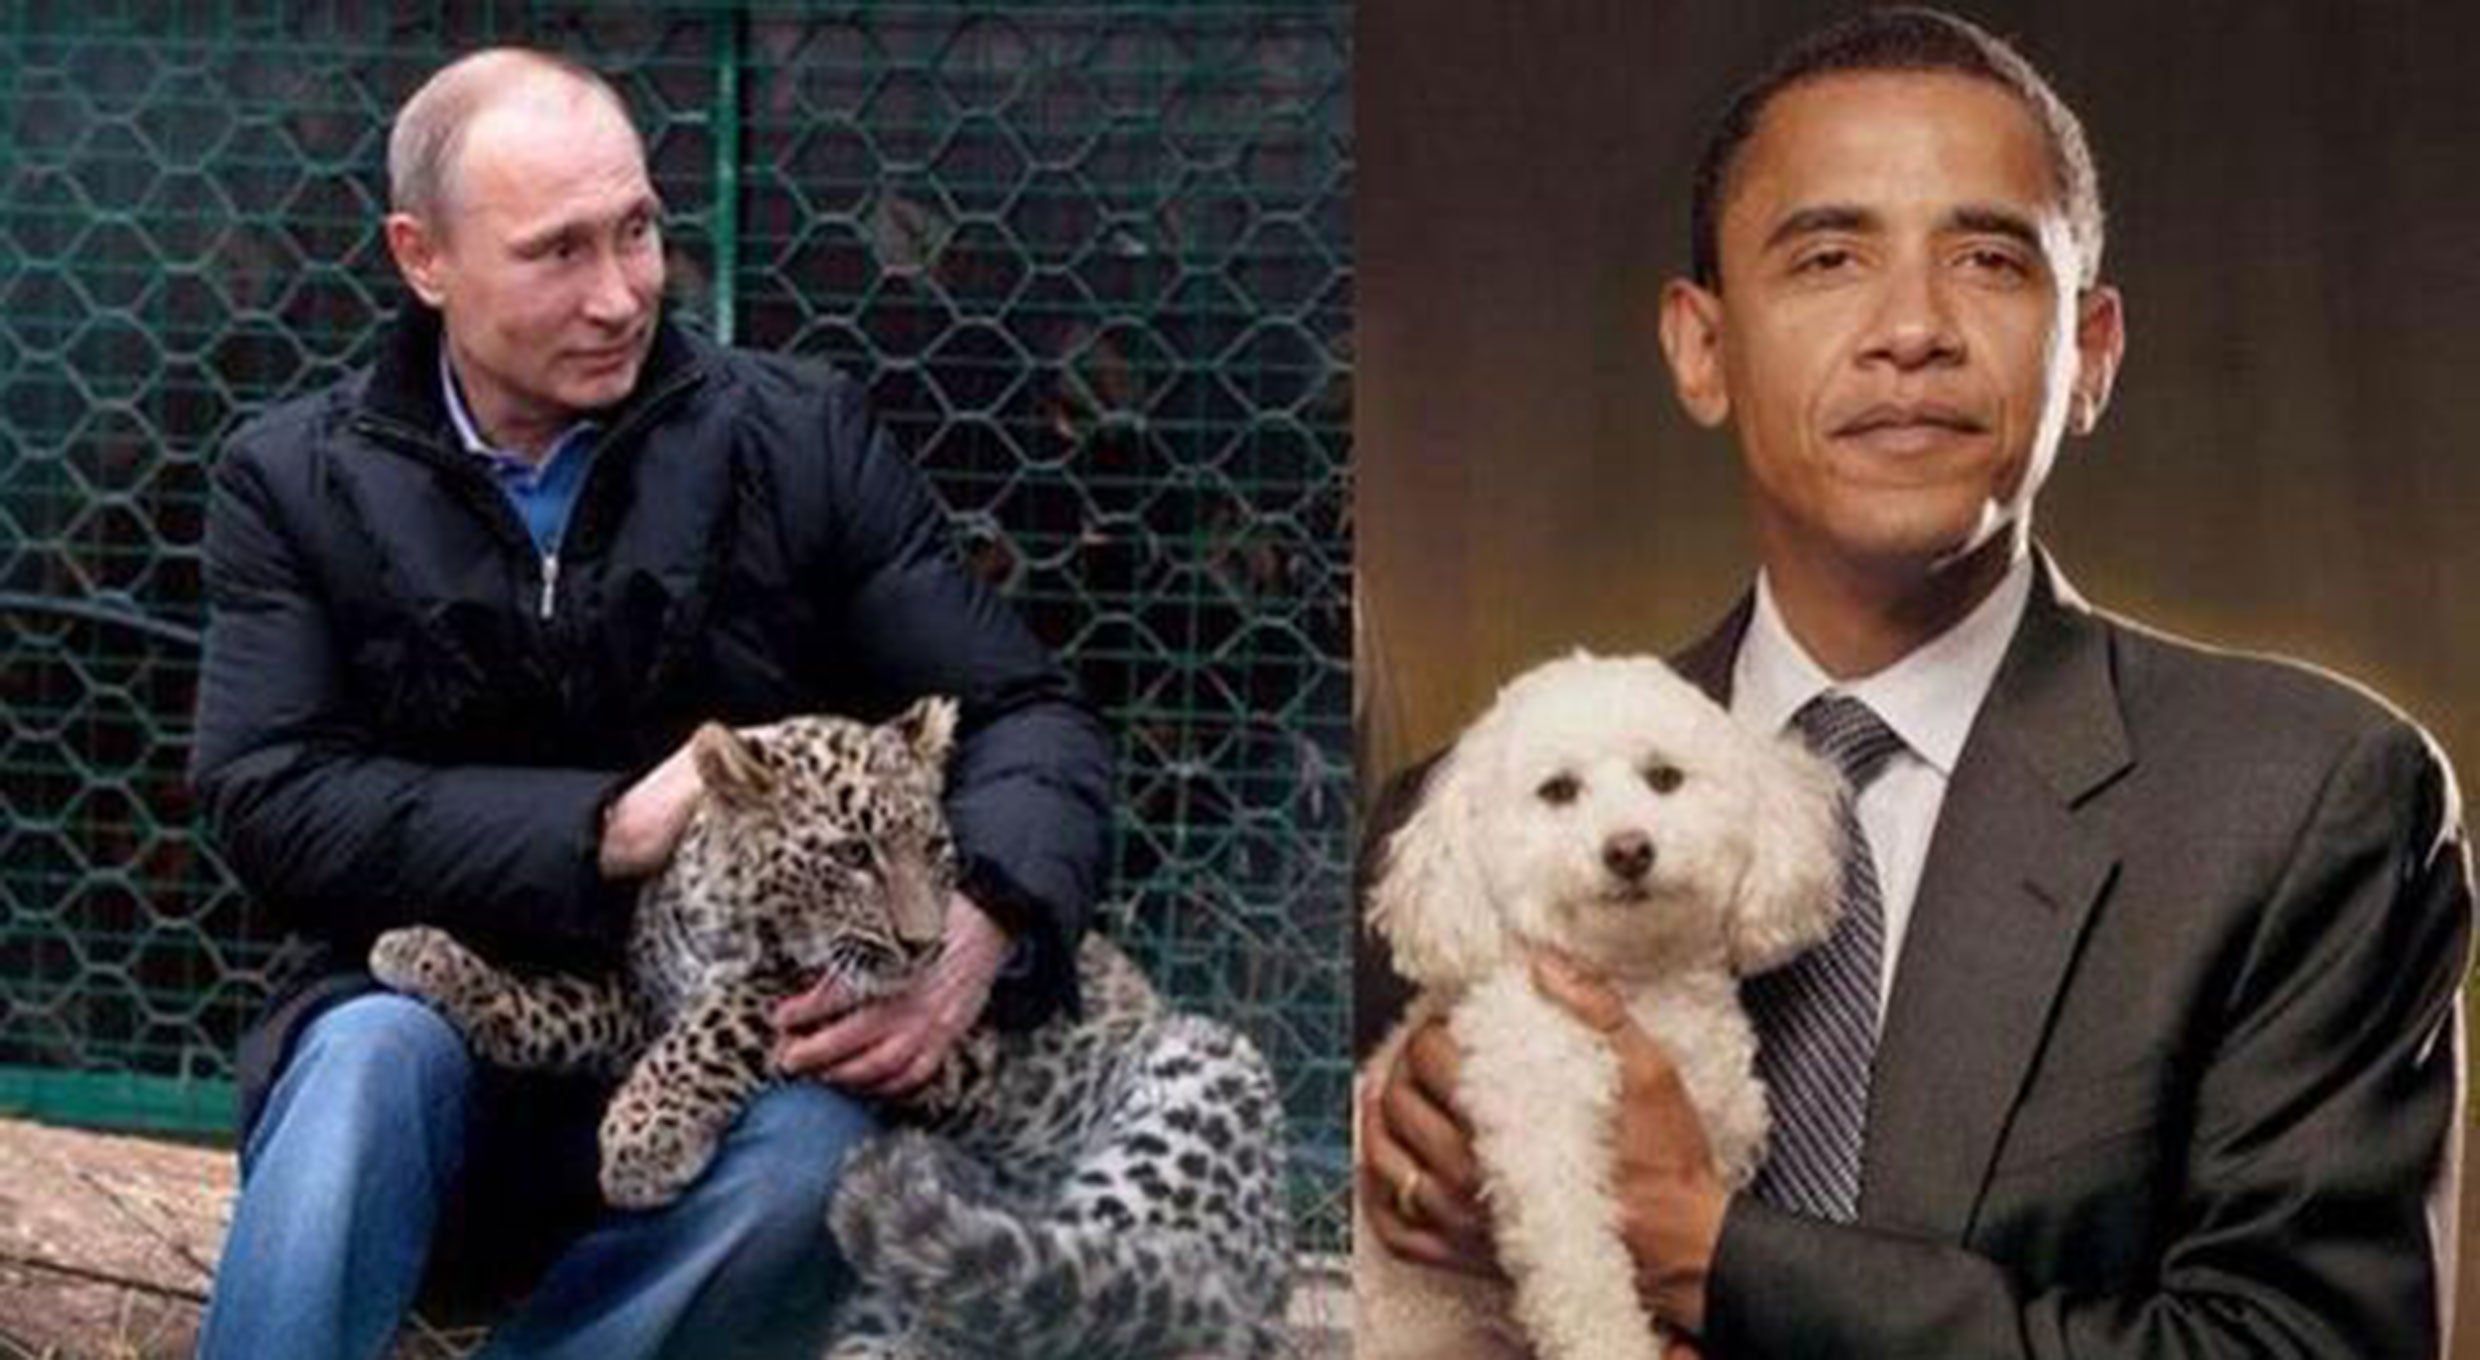 The Russian deputy prime minister tweeted a rather bizarre picture comparing the masculinity of Vladimir Putin, petting a leopard, and Barack Obama, holding a fluffy poodle